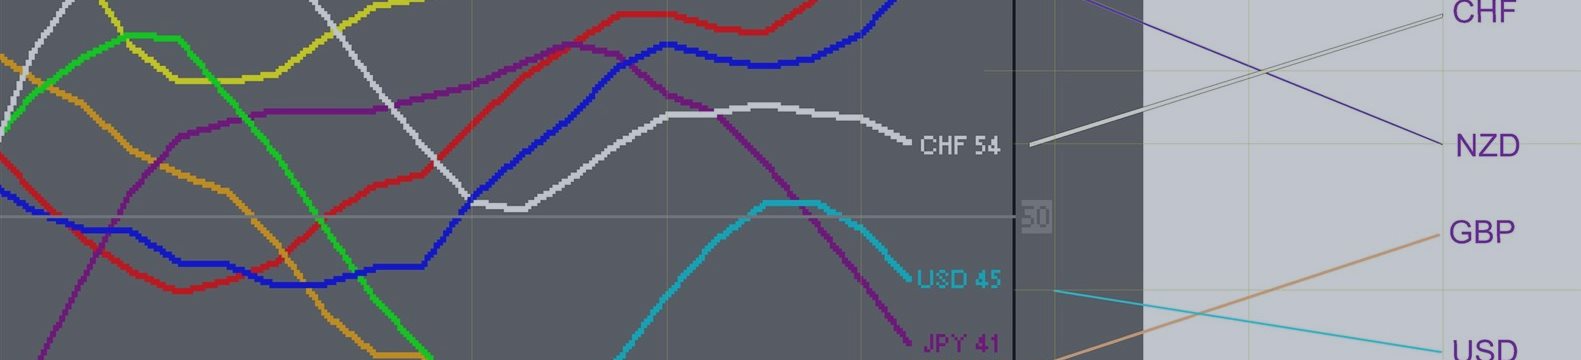 Forecast of movement of currency indexes next week 07.03 -13.03.2016.